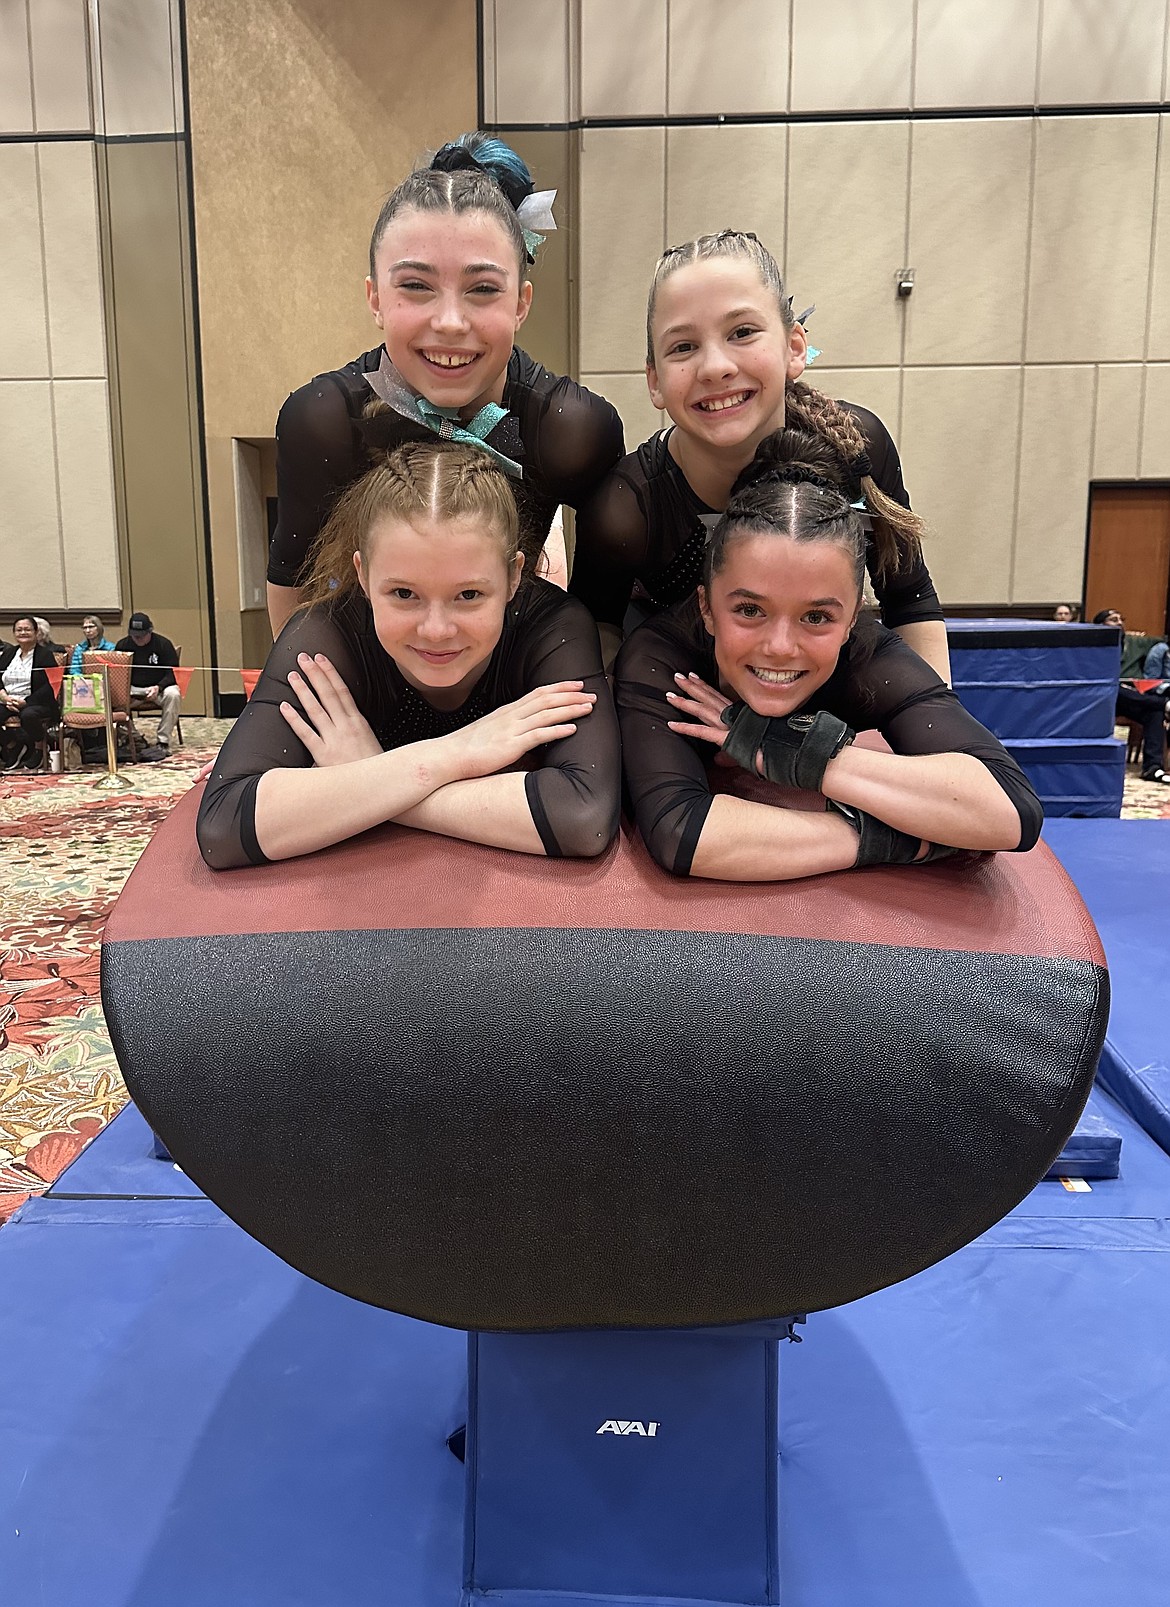 Courtesy photo
Avant Coeur Gymnastics Level 8s take 1st Place Team at the Brestyan's Invitational in Las Vegas. In the front row from left are Eva Martin and Kate Mauch; and back row from left, Sage Kermelis and Kaylee Strimback.